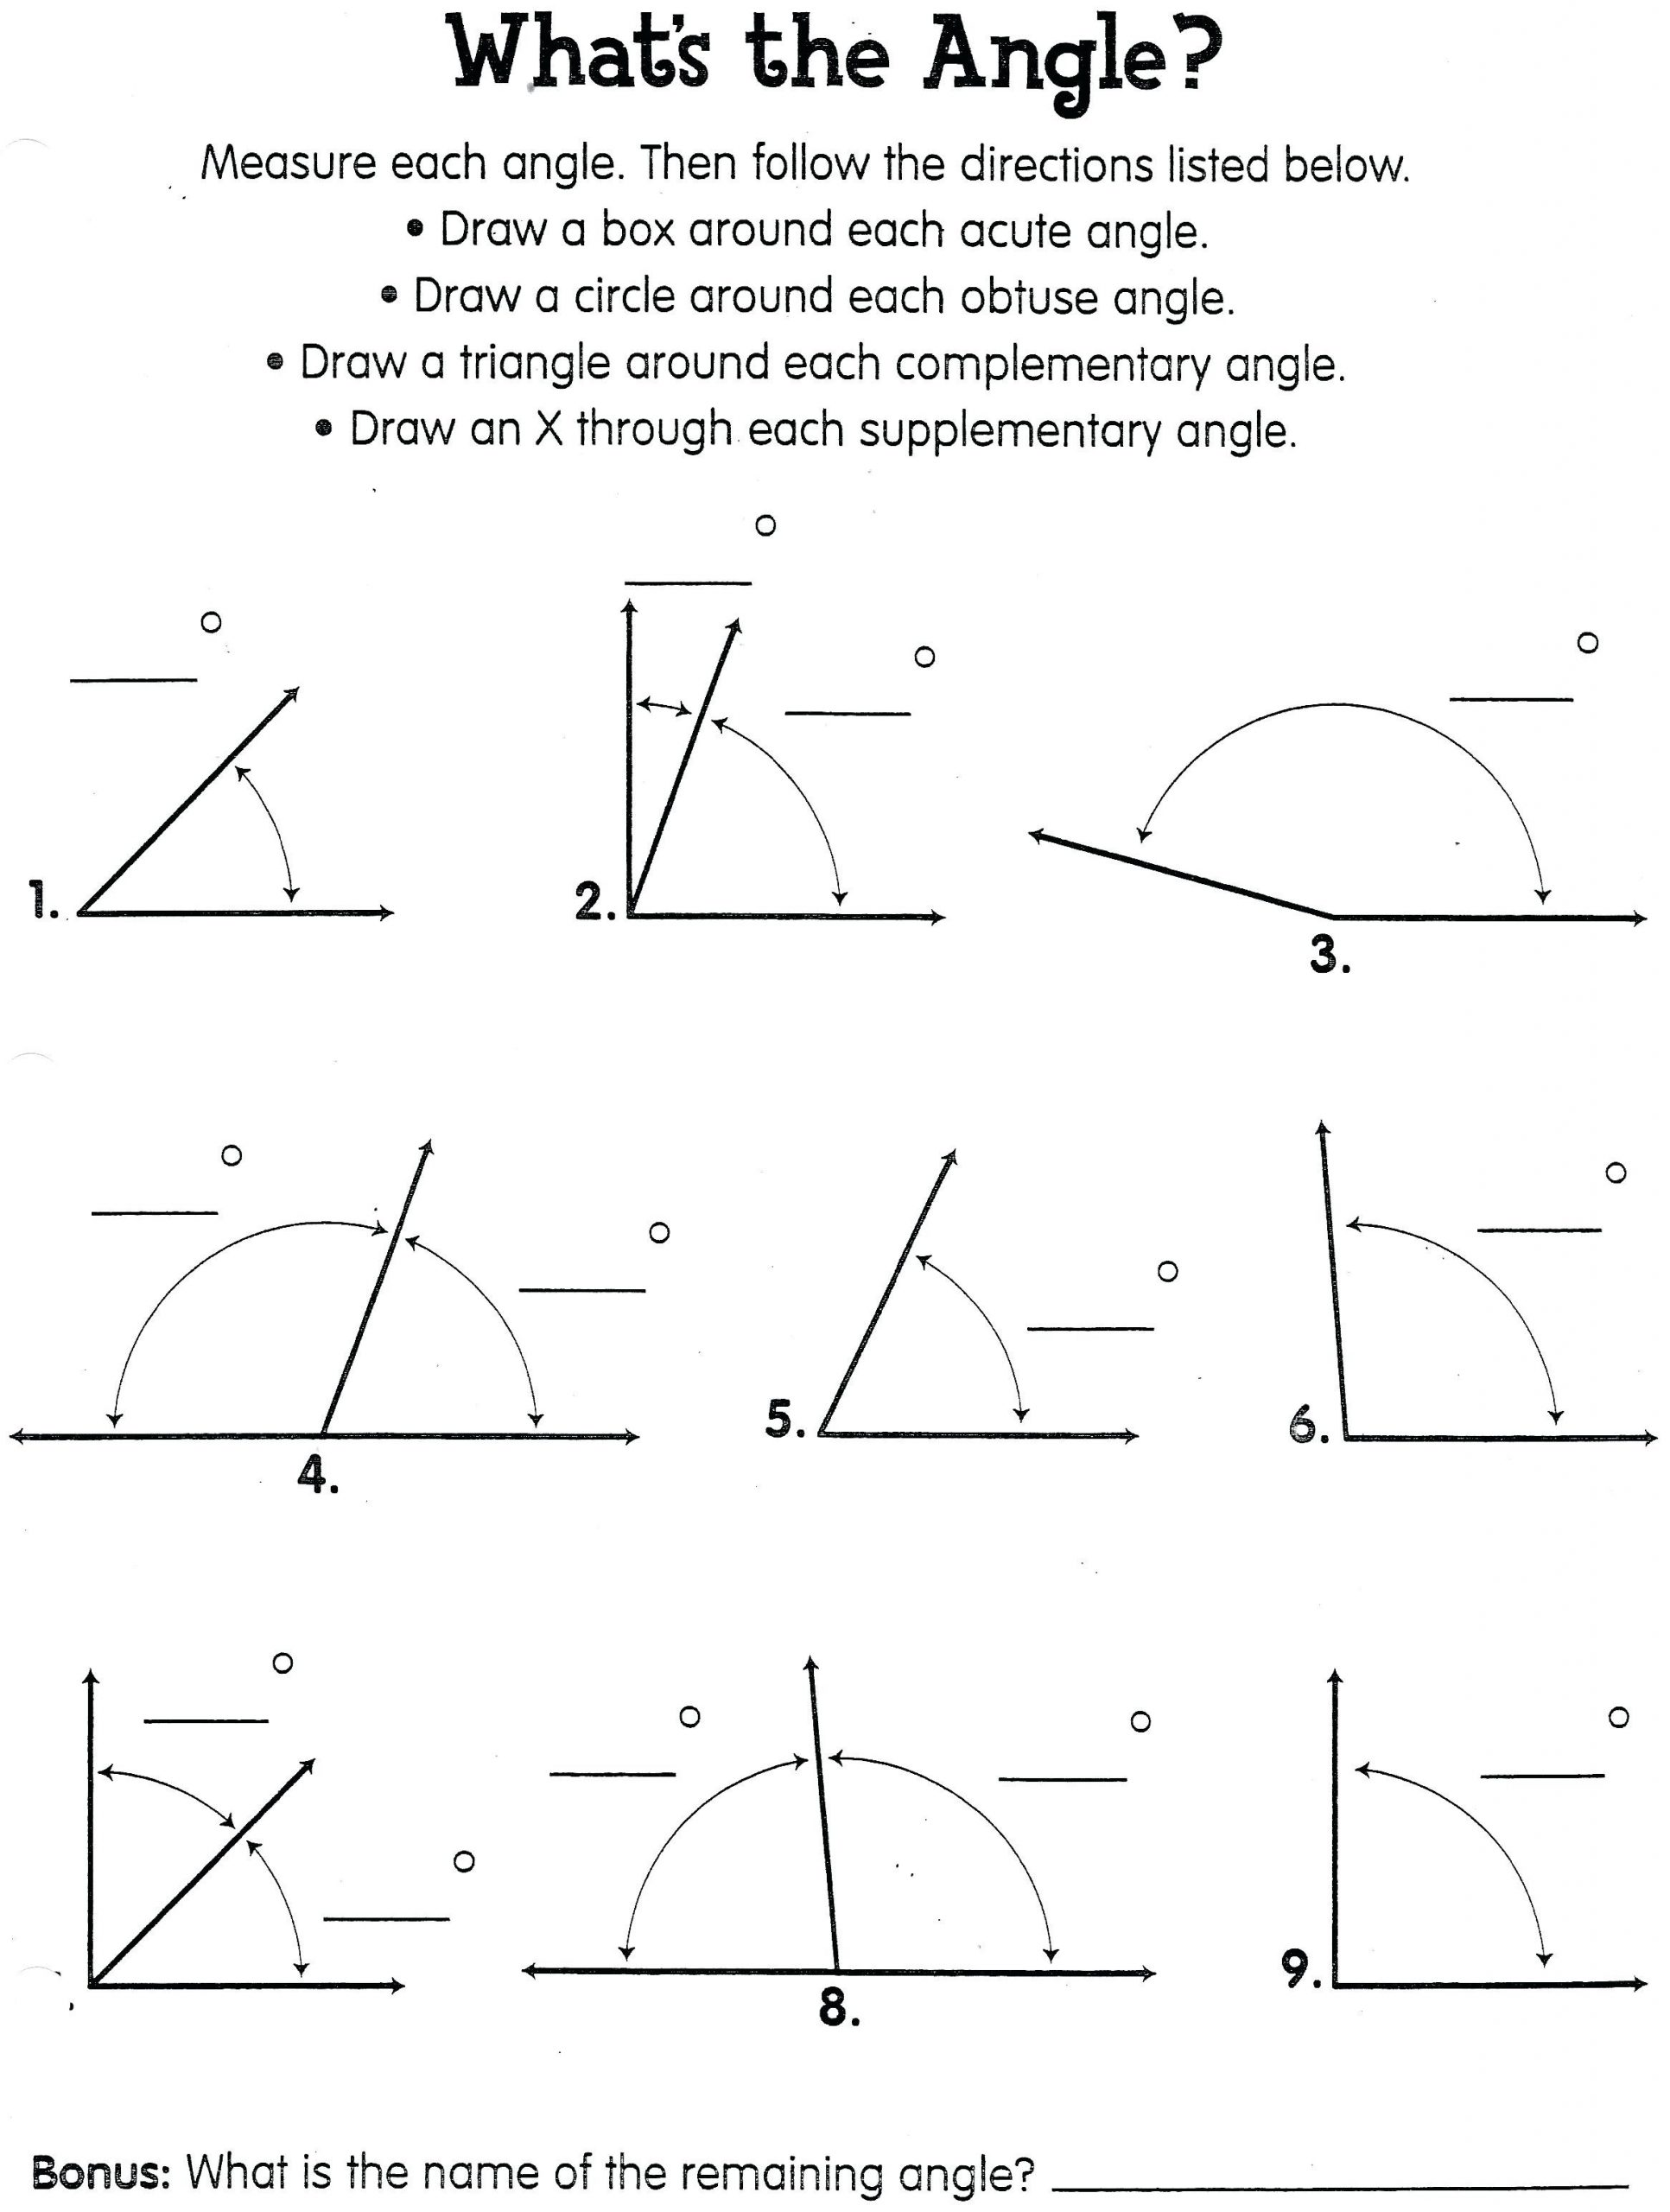 Finding Angle Measures Worksheet Angle Measurement Worksheet Angle Worksheets Angle